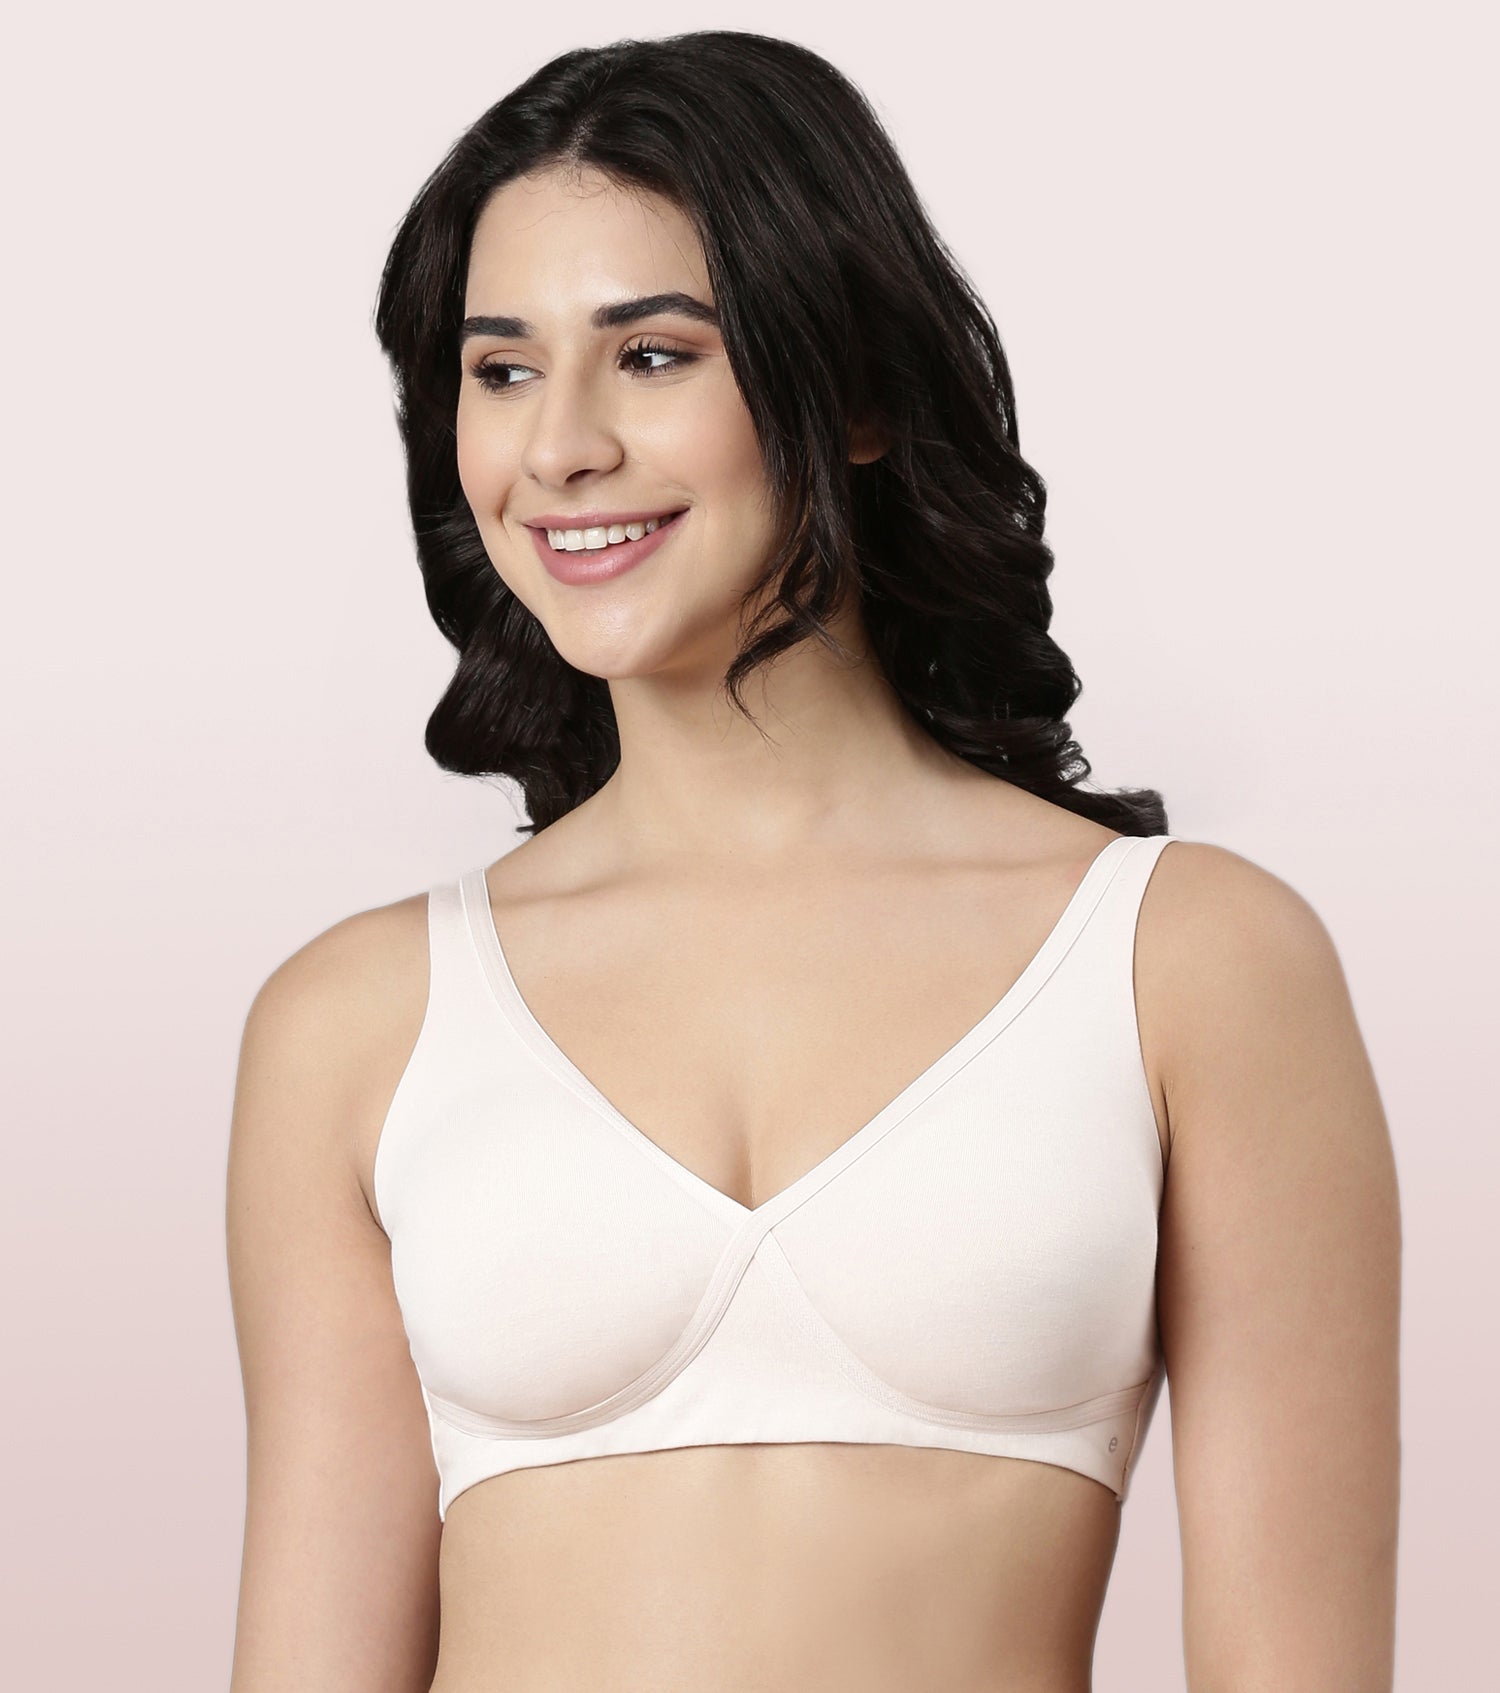 Nykaa - Confidence is sexy! 💯 Sporty or sensuous, what is your pick? ⚽💃🏻  ⭐ Enamor F074 Strapless T-Shirt Bra Full Support, Padded & Wired: Rs.1299 ⭐  Enamor F023 T-Shirt Bra Padded